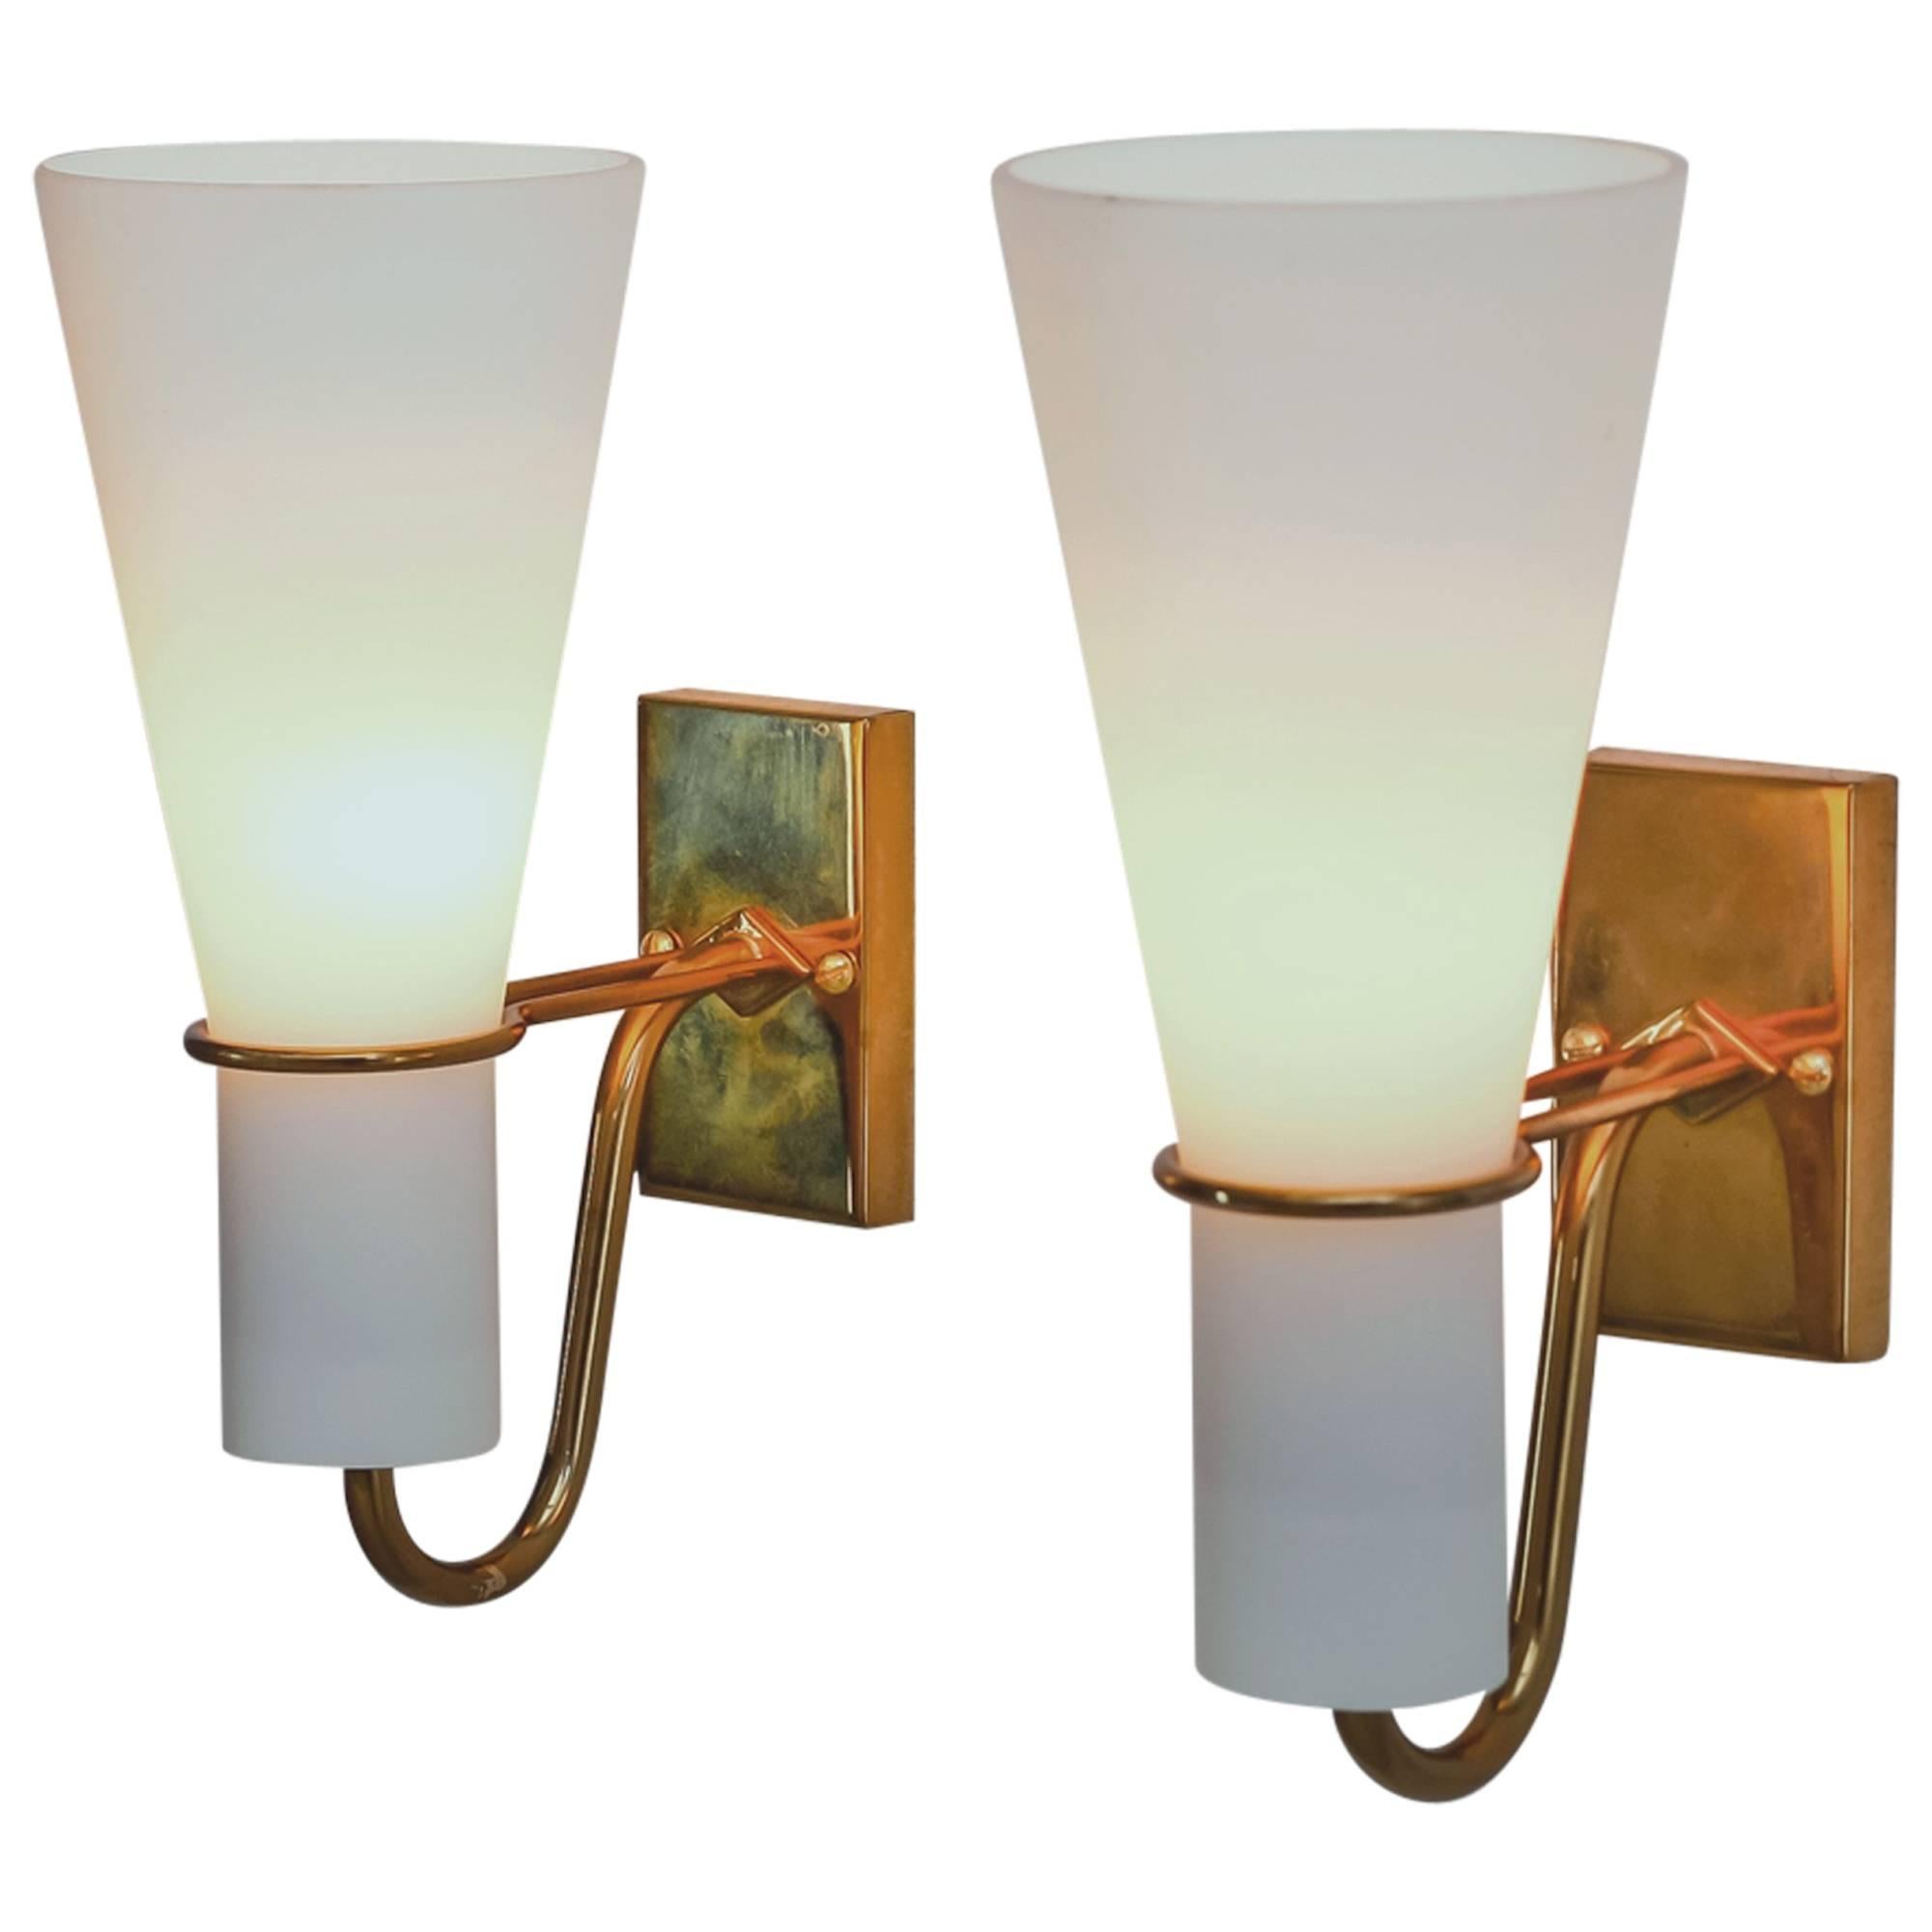 Asea brass and opaline glass bedside wall lamps, Sweden, 1950s